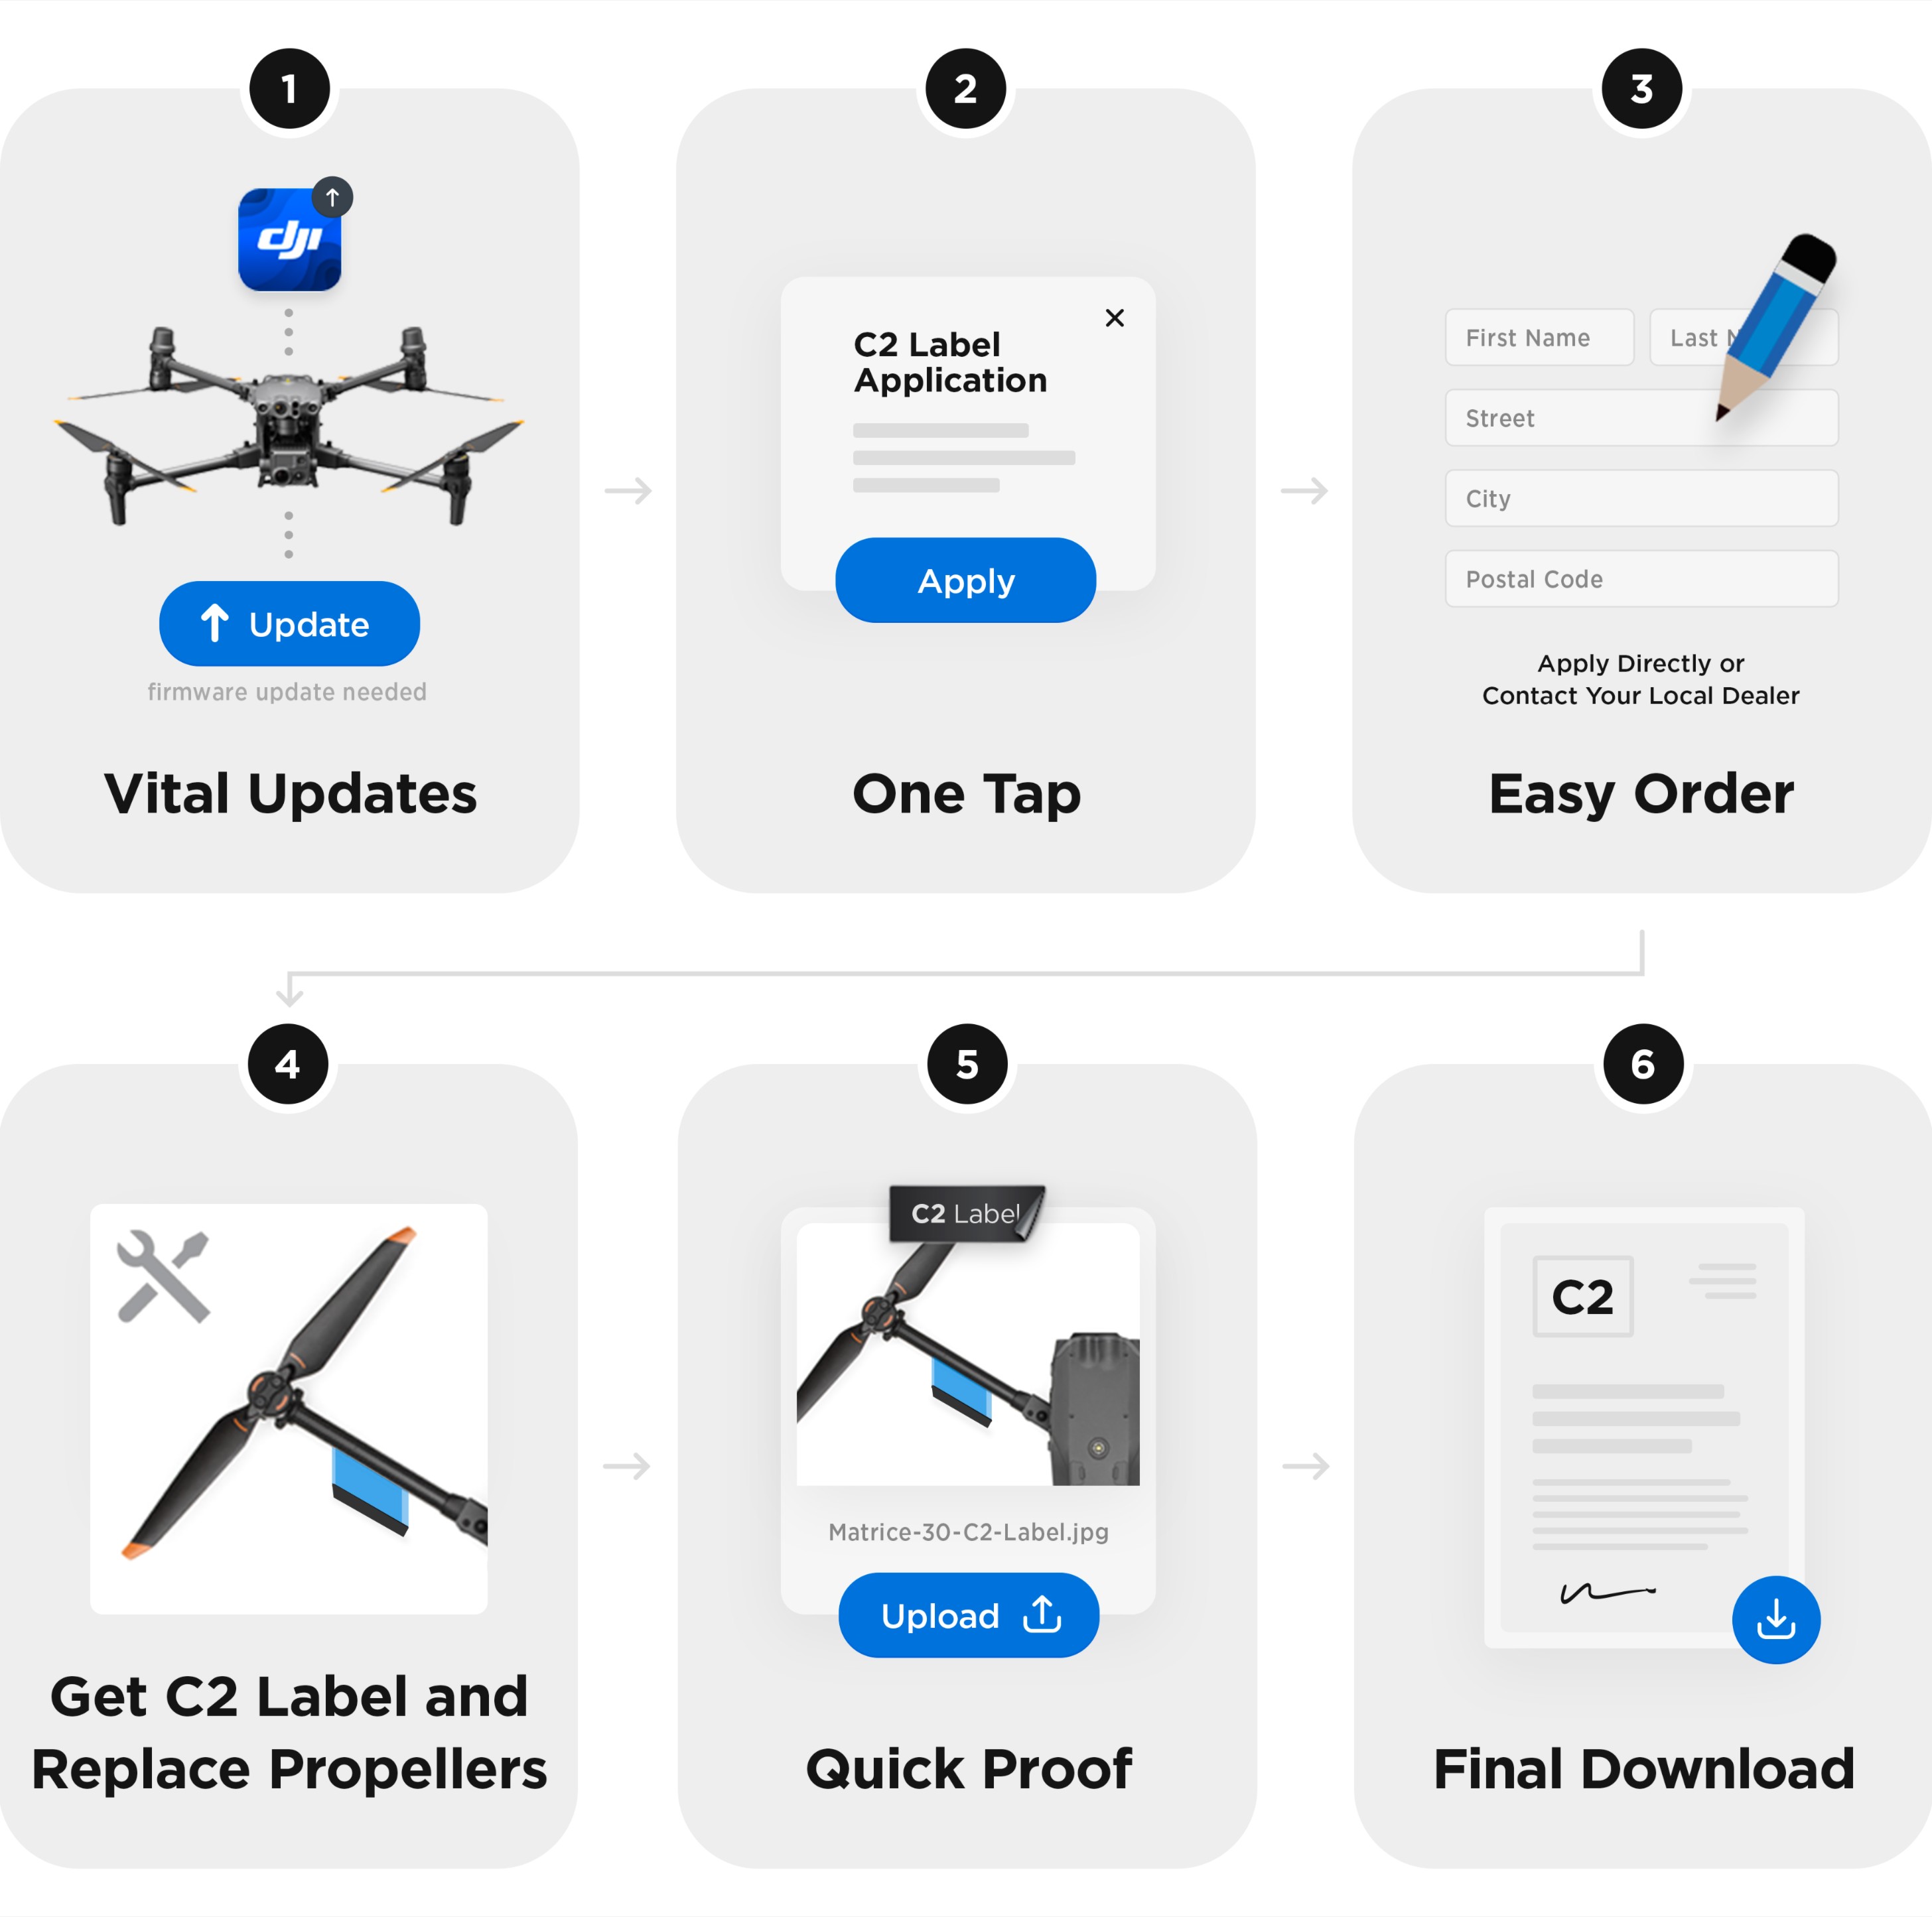 DJI Introduces Voluntary Flight Identification Options For Drone